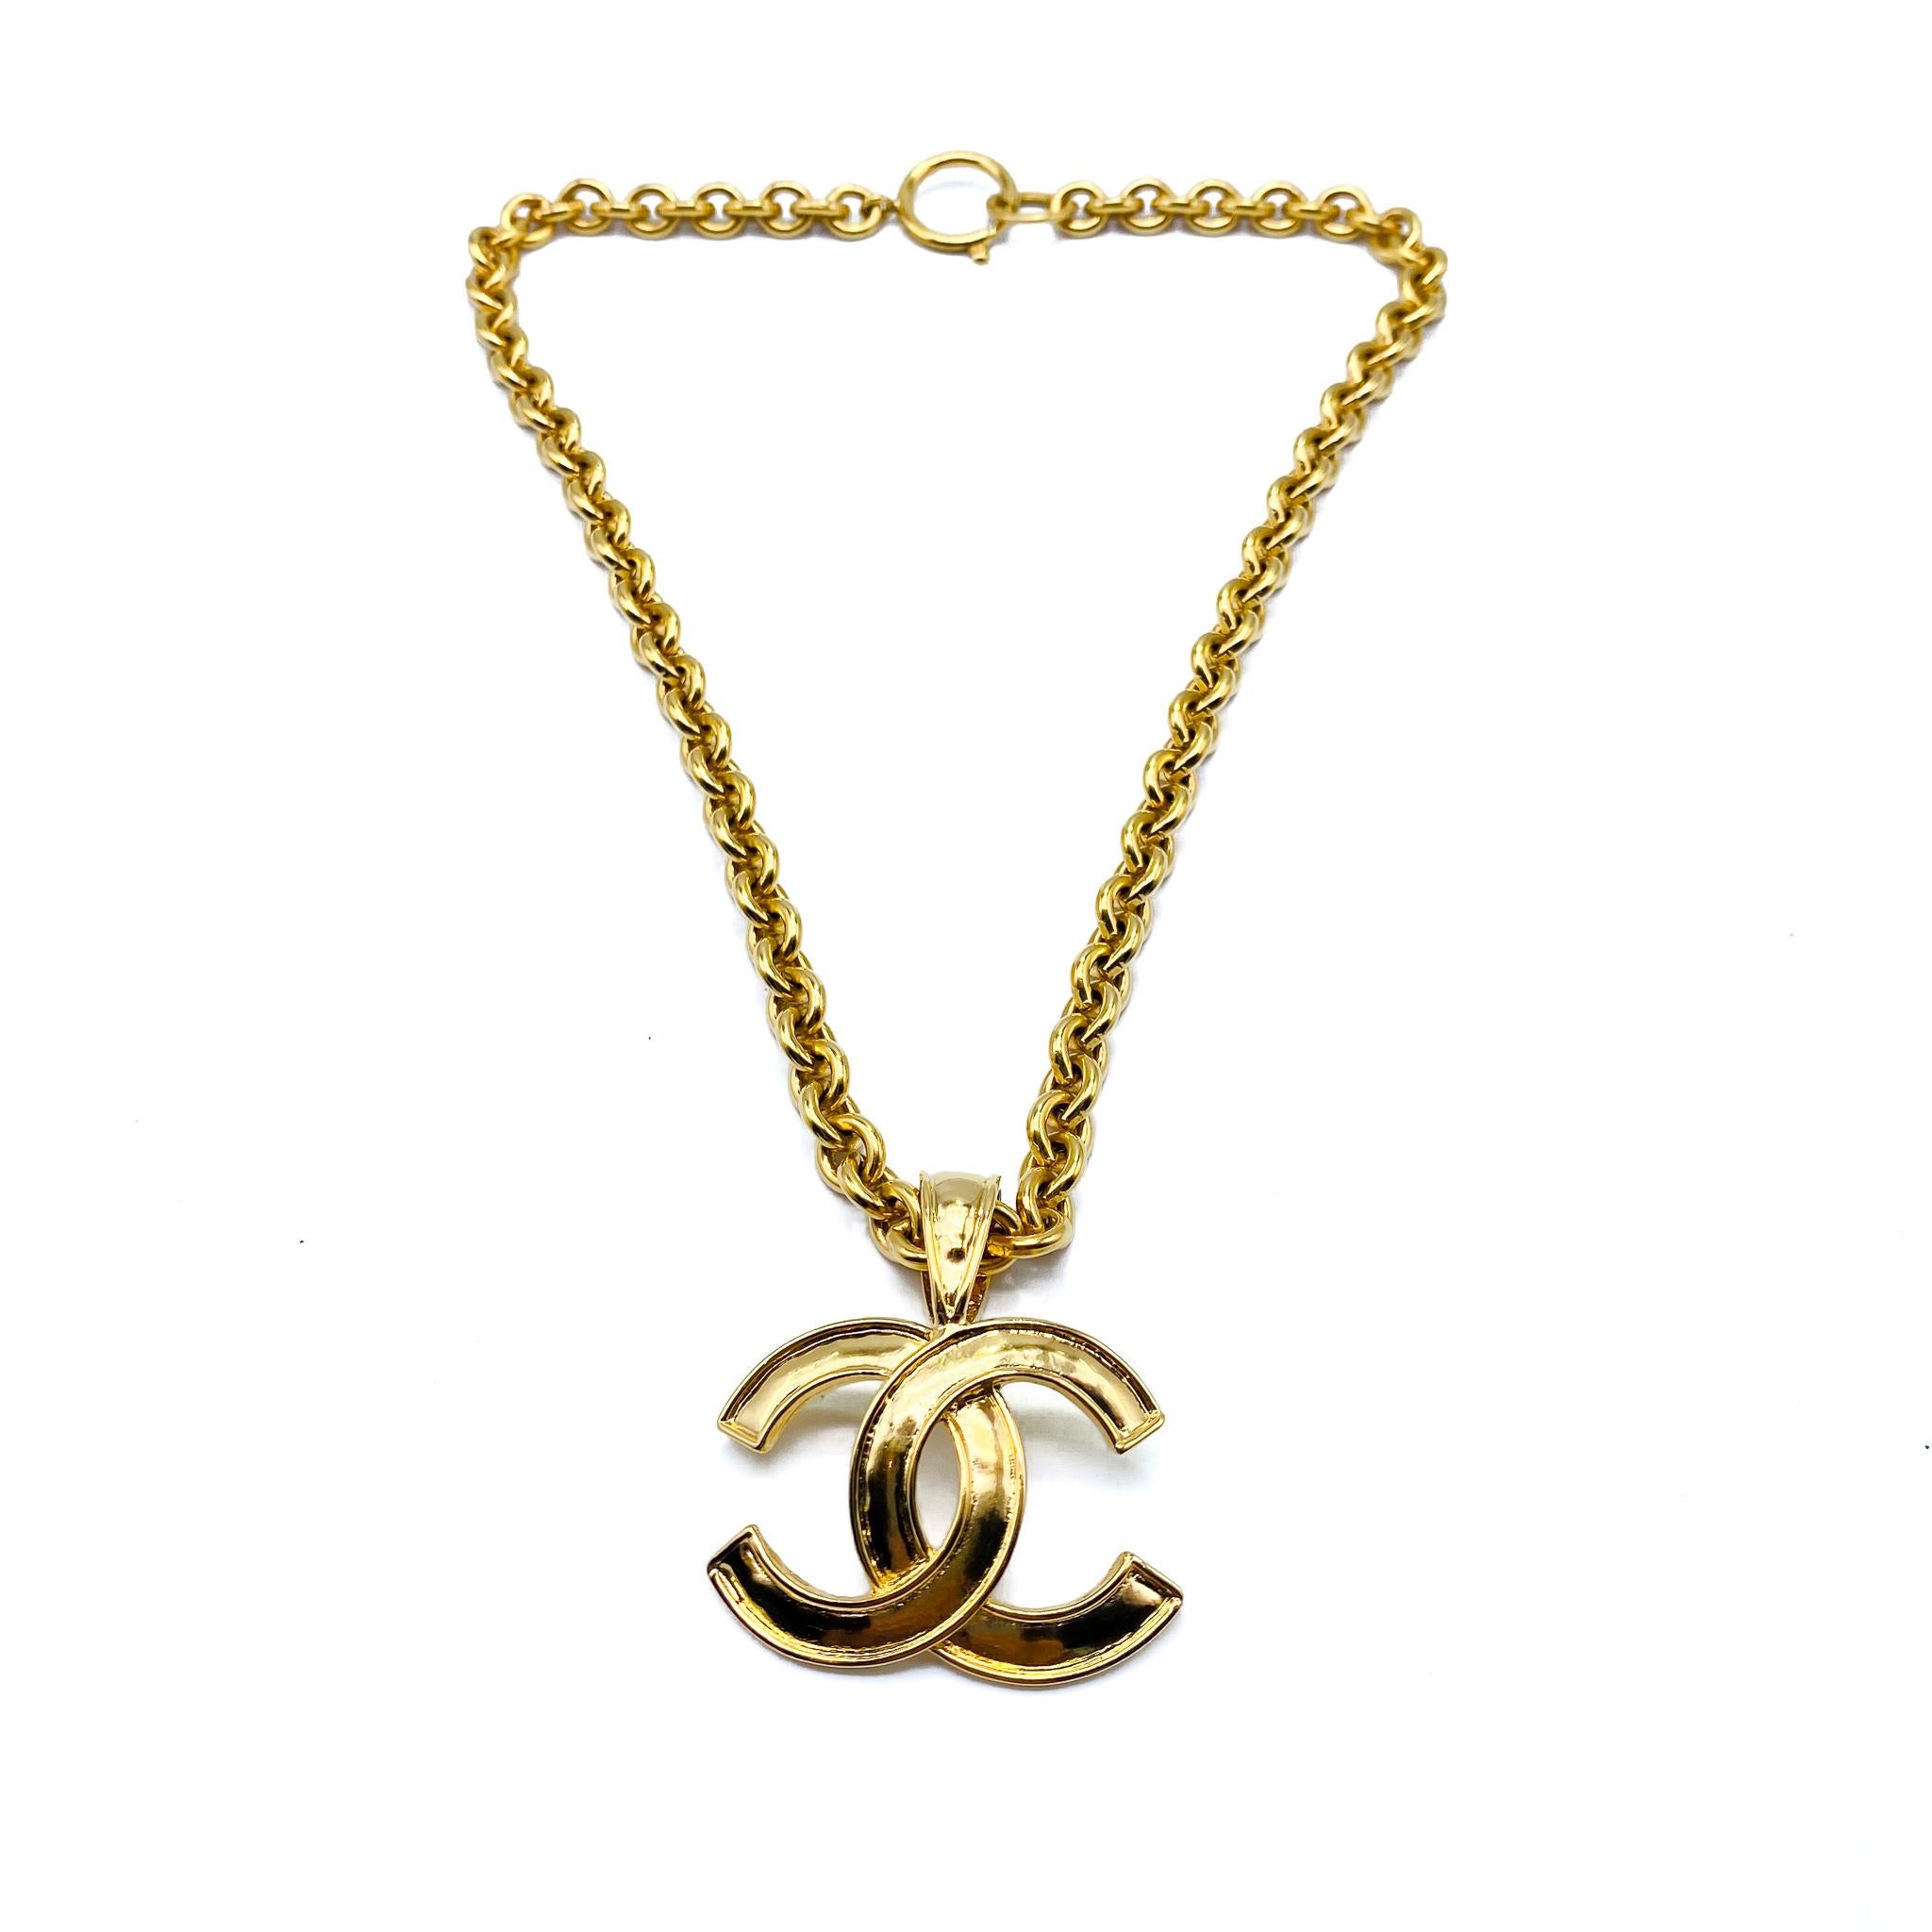 Vintage Chanel Necklace 1990s - 1994 AW Collection 4